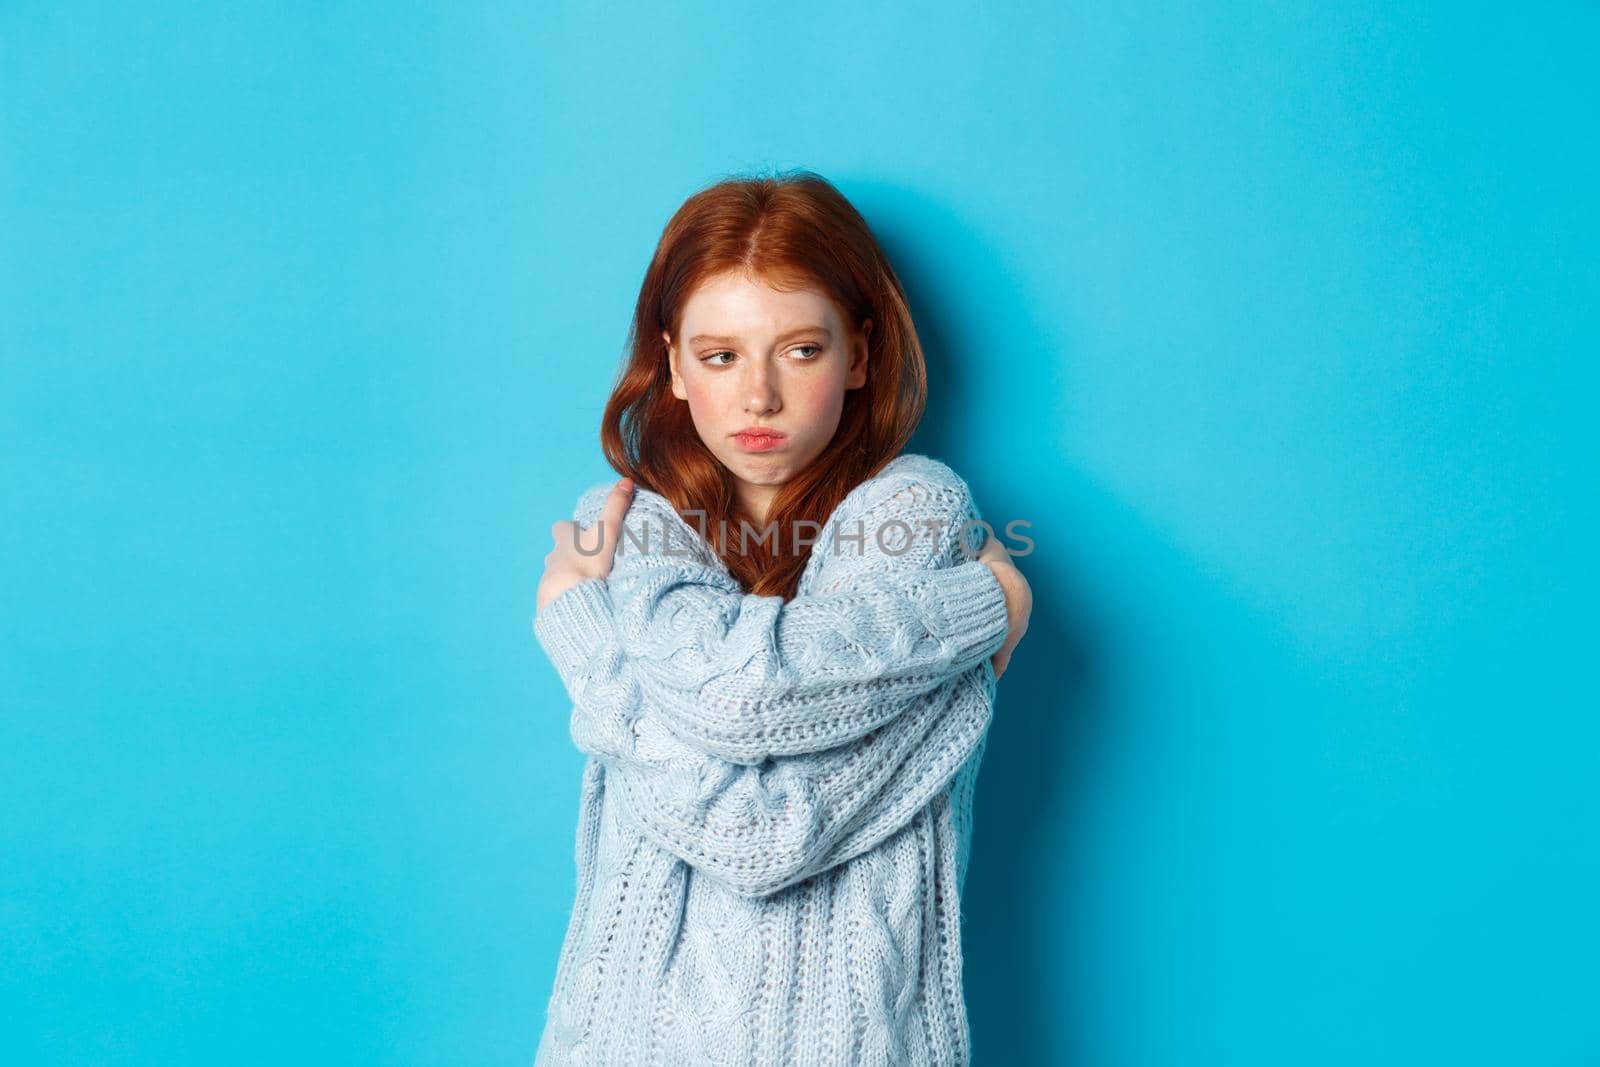 Silly and cute redhead girl pucker lips and looking offended, hugging herself and looking away offended, sulking and being upset, standing over blue background.